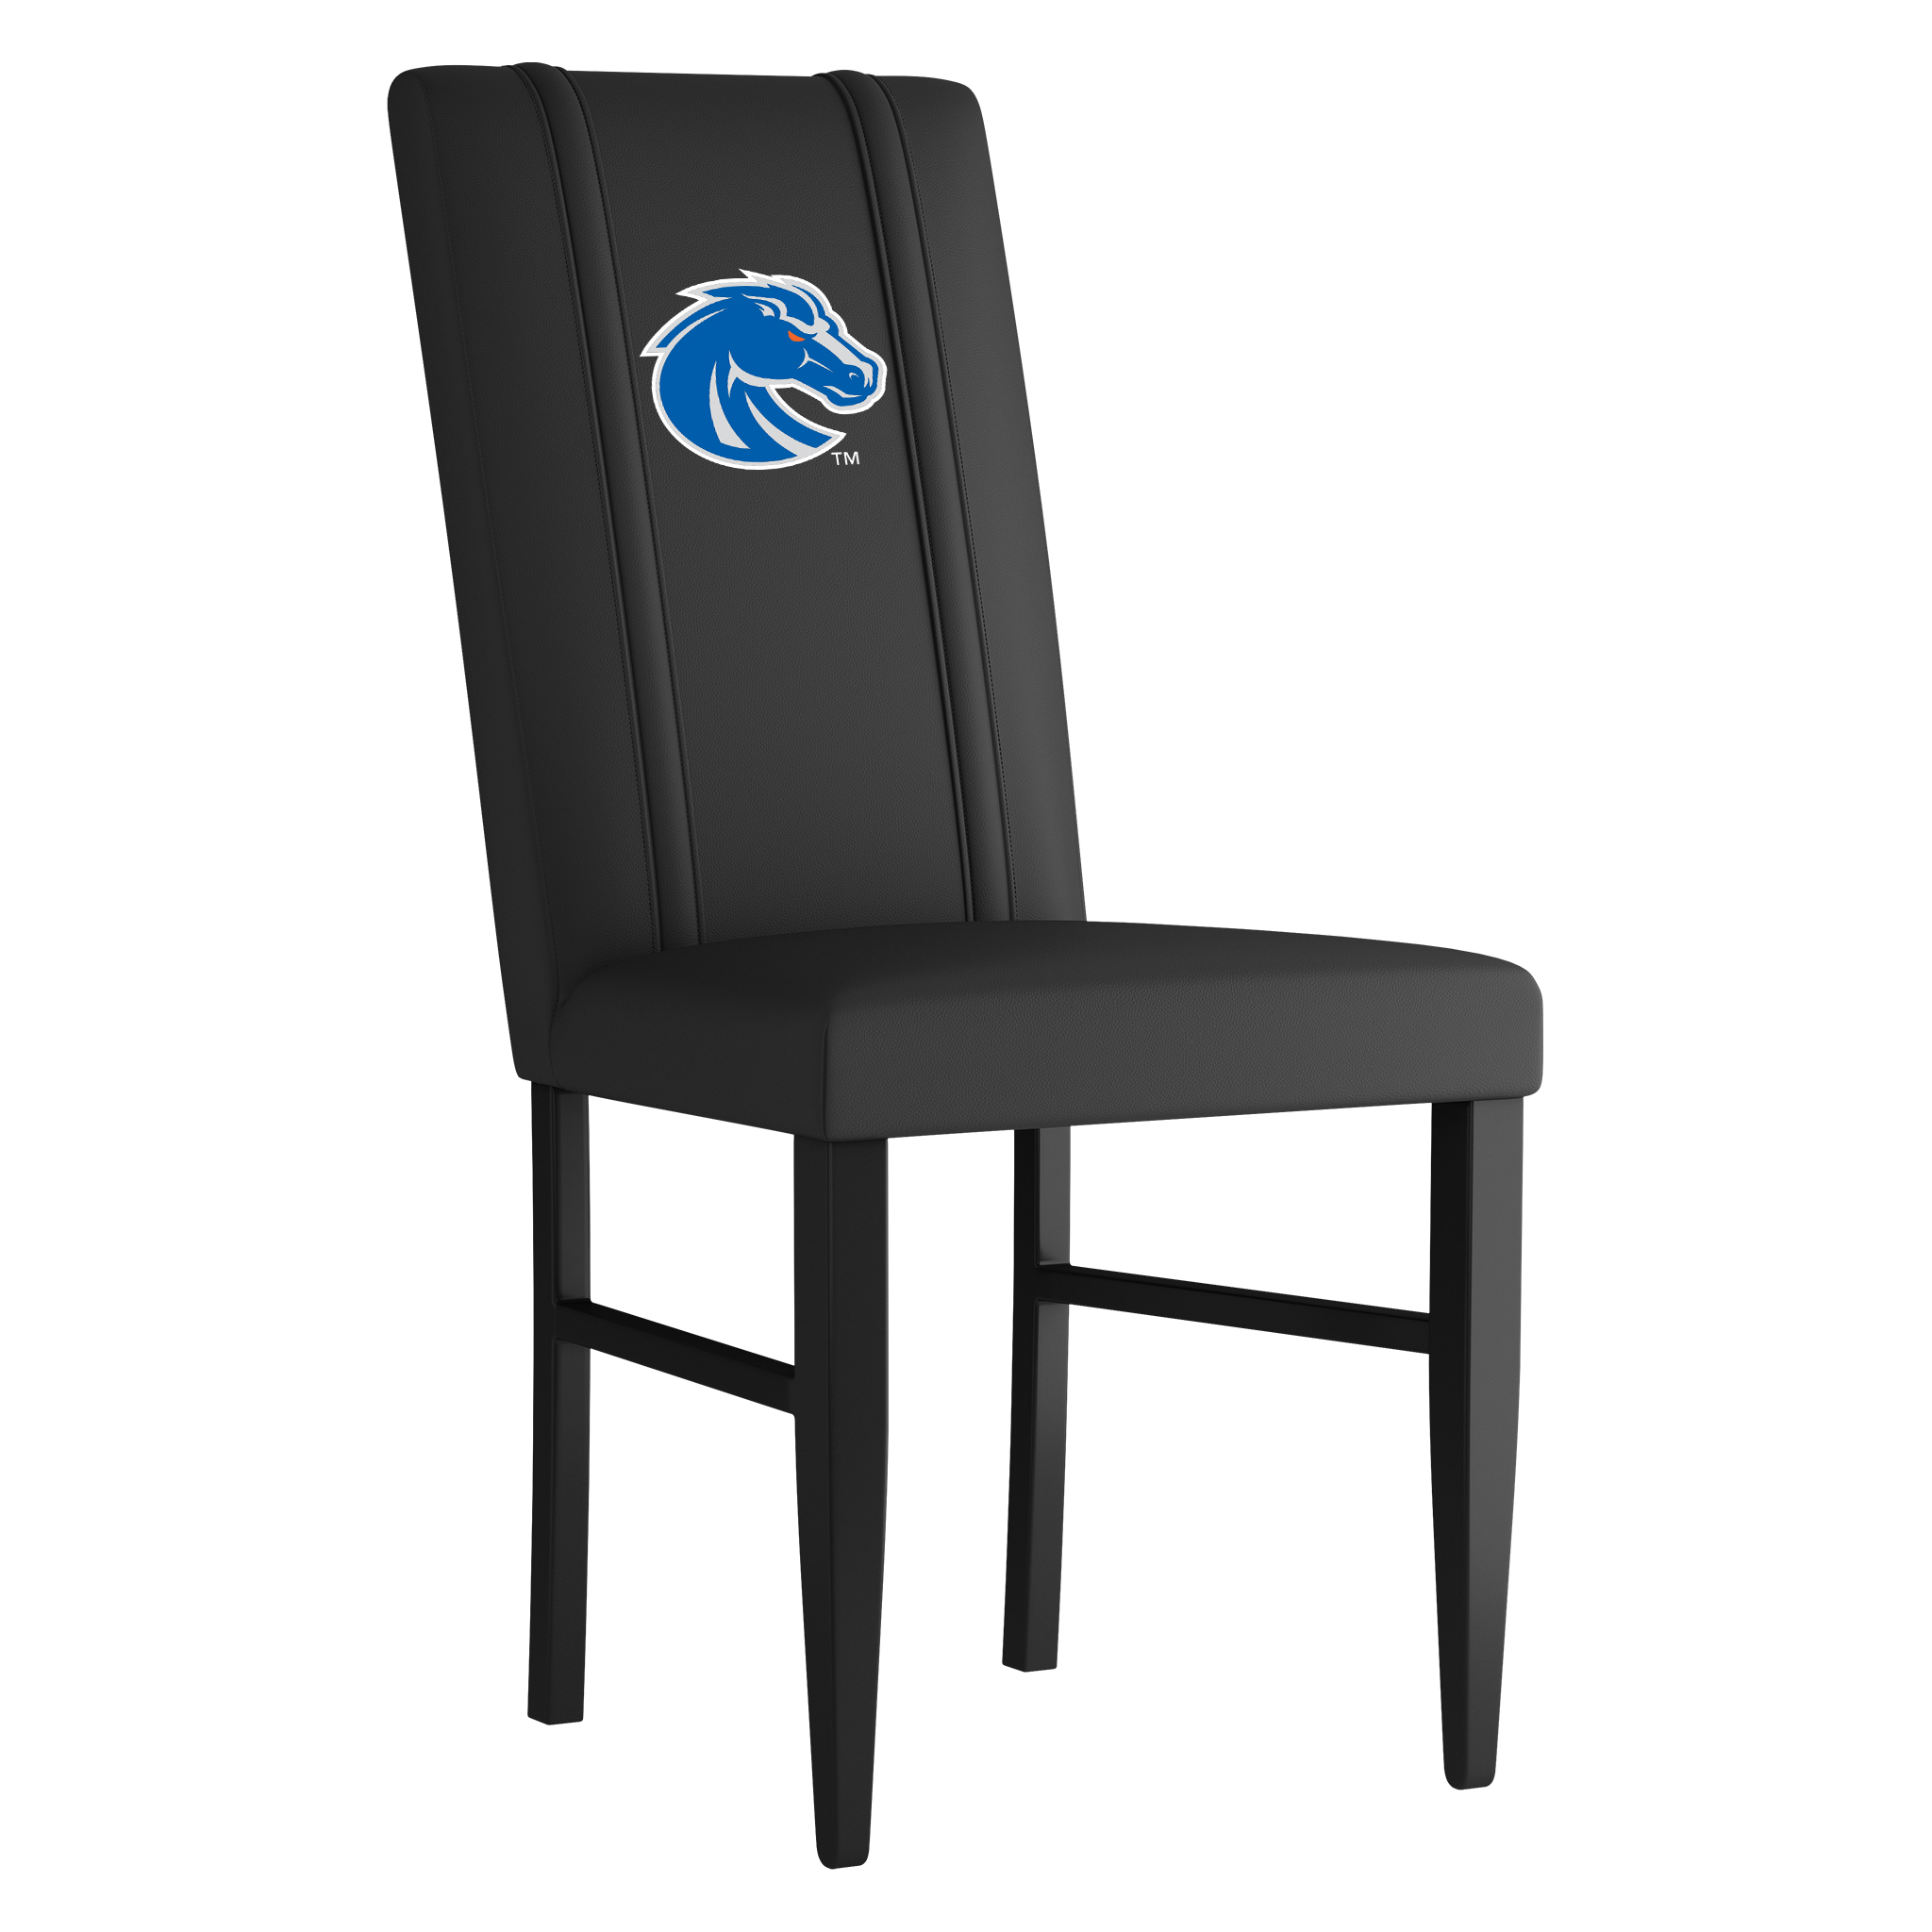 Boise State Broncos Side Chair 2000 With Boise State Broncos Logo